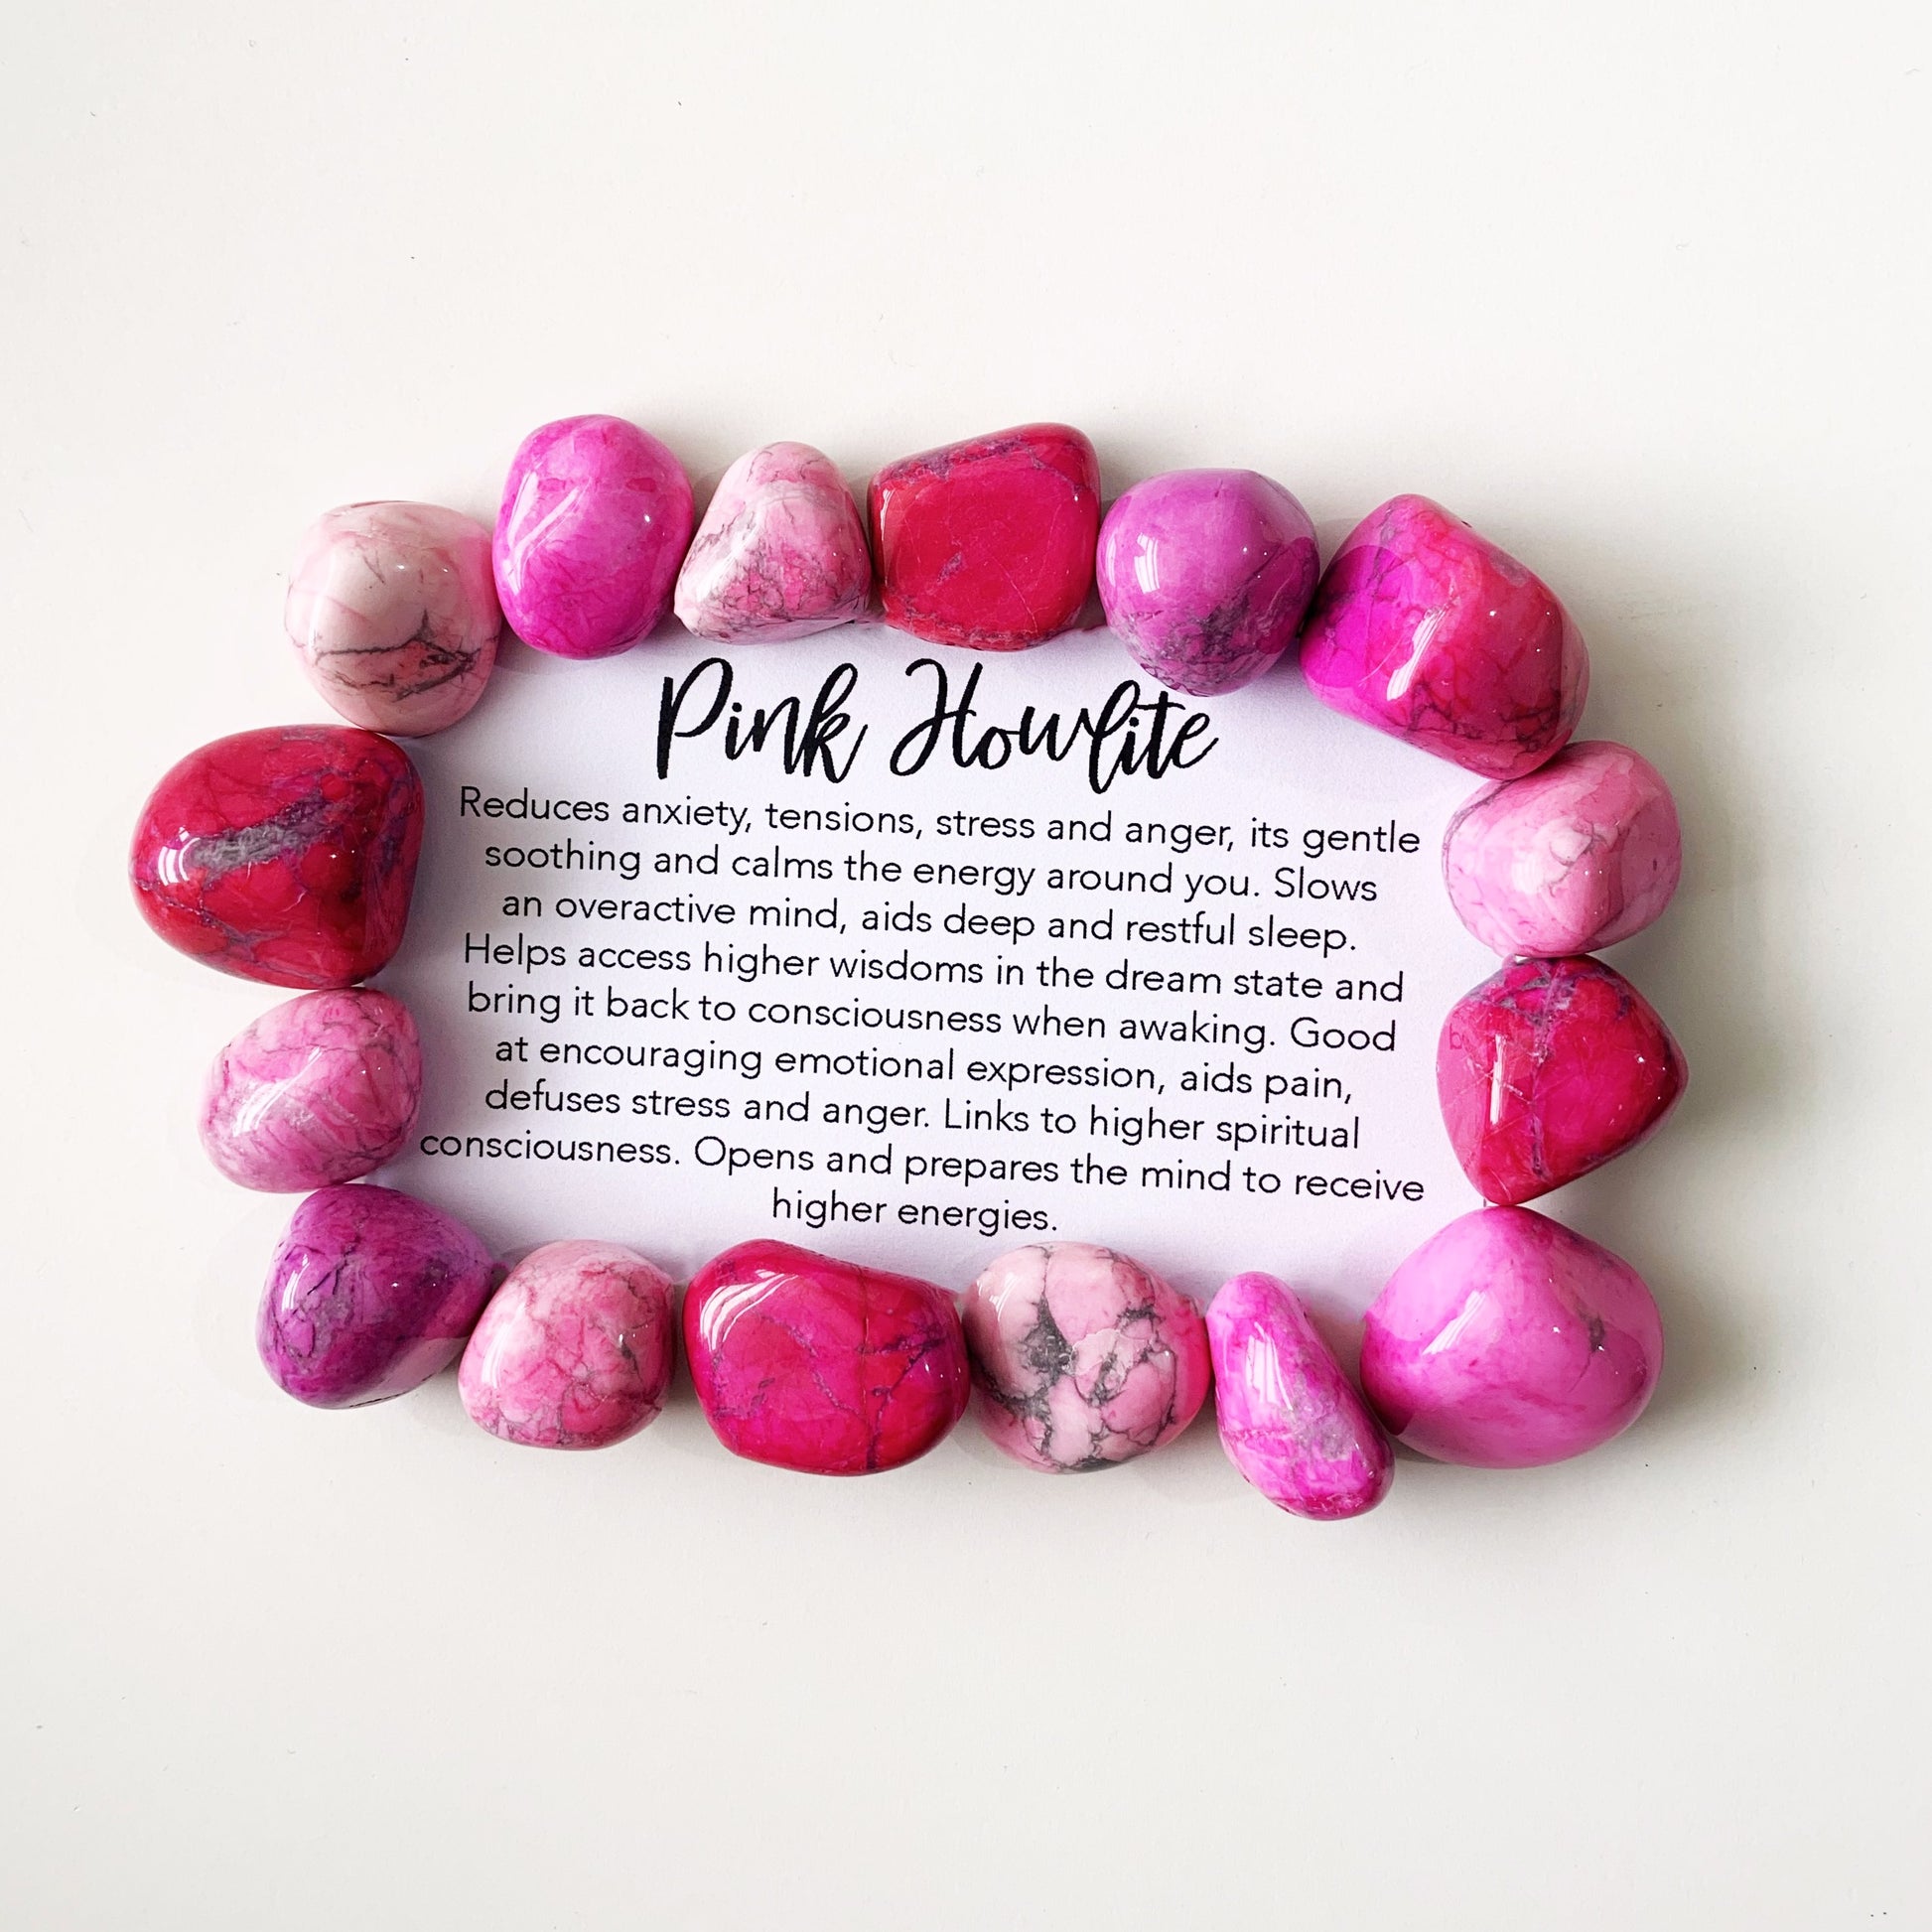 Pink Howlite is a great stone to reduce anxiety, tensions, stress and anger, it is gentle, soothing and calms the energy around you. It has a hugely calming influence helping to slow an over active mind, and in turn this can help to achieve a deep and restful sleep.  Listing 1 stone.